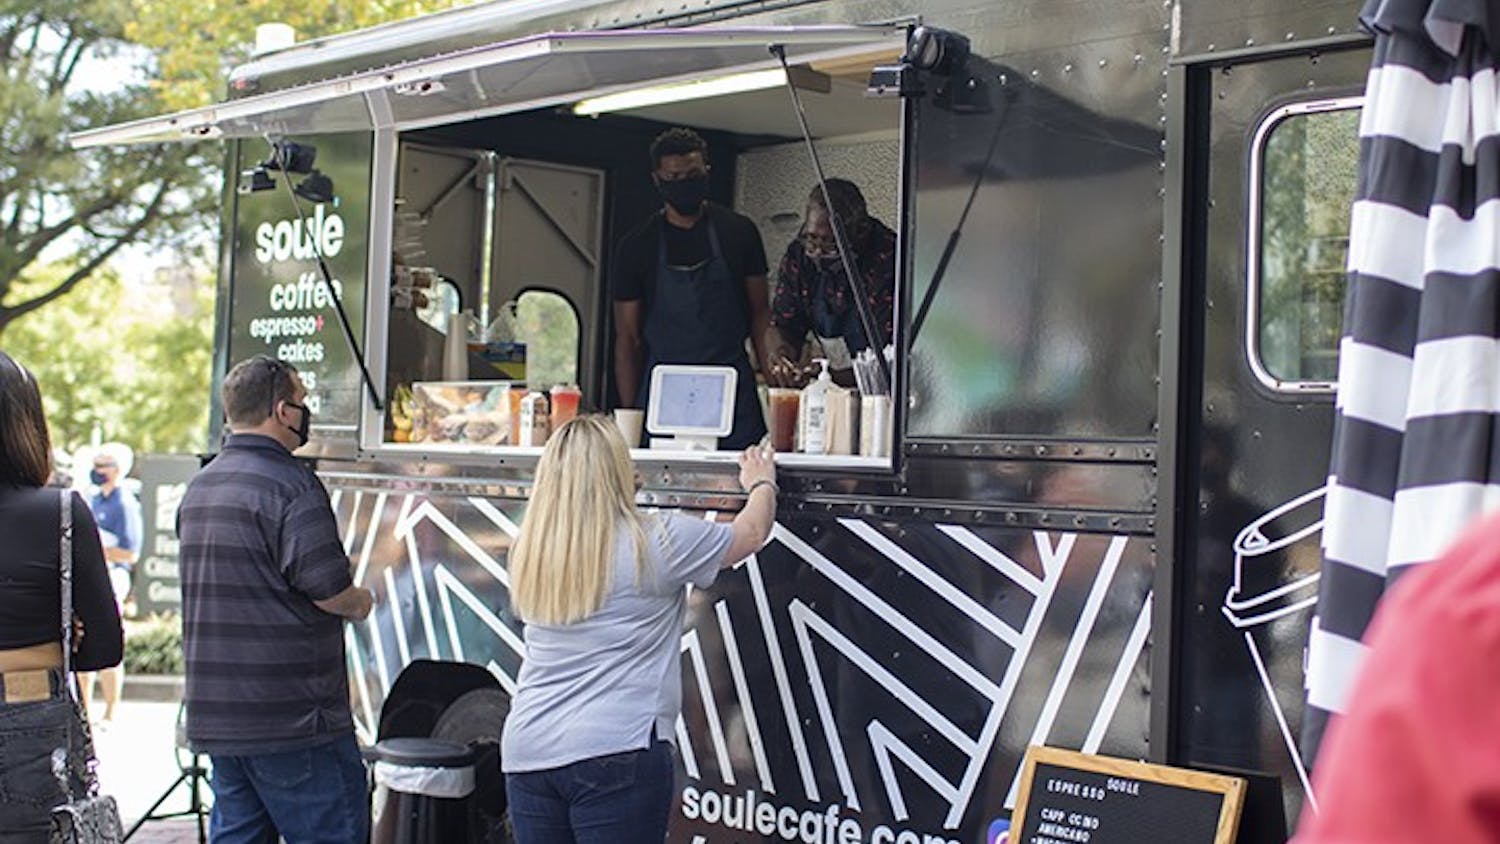 A customer ordering from the Soulé Coffee Truck. The truck is a popular attraction at Soda City for all types of drink creations.